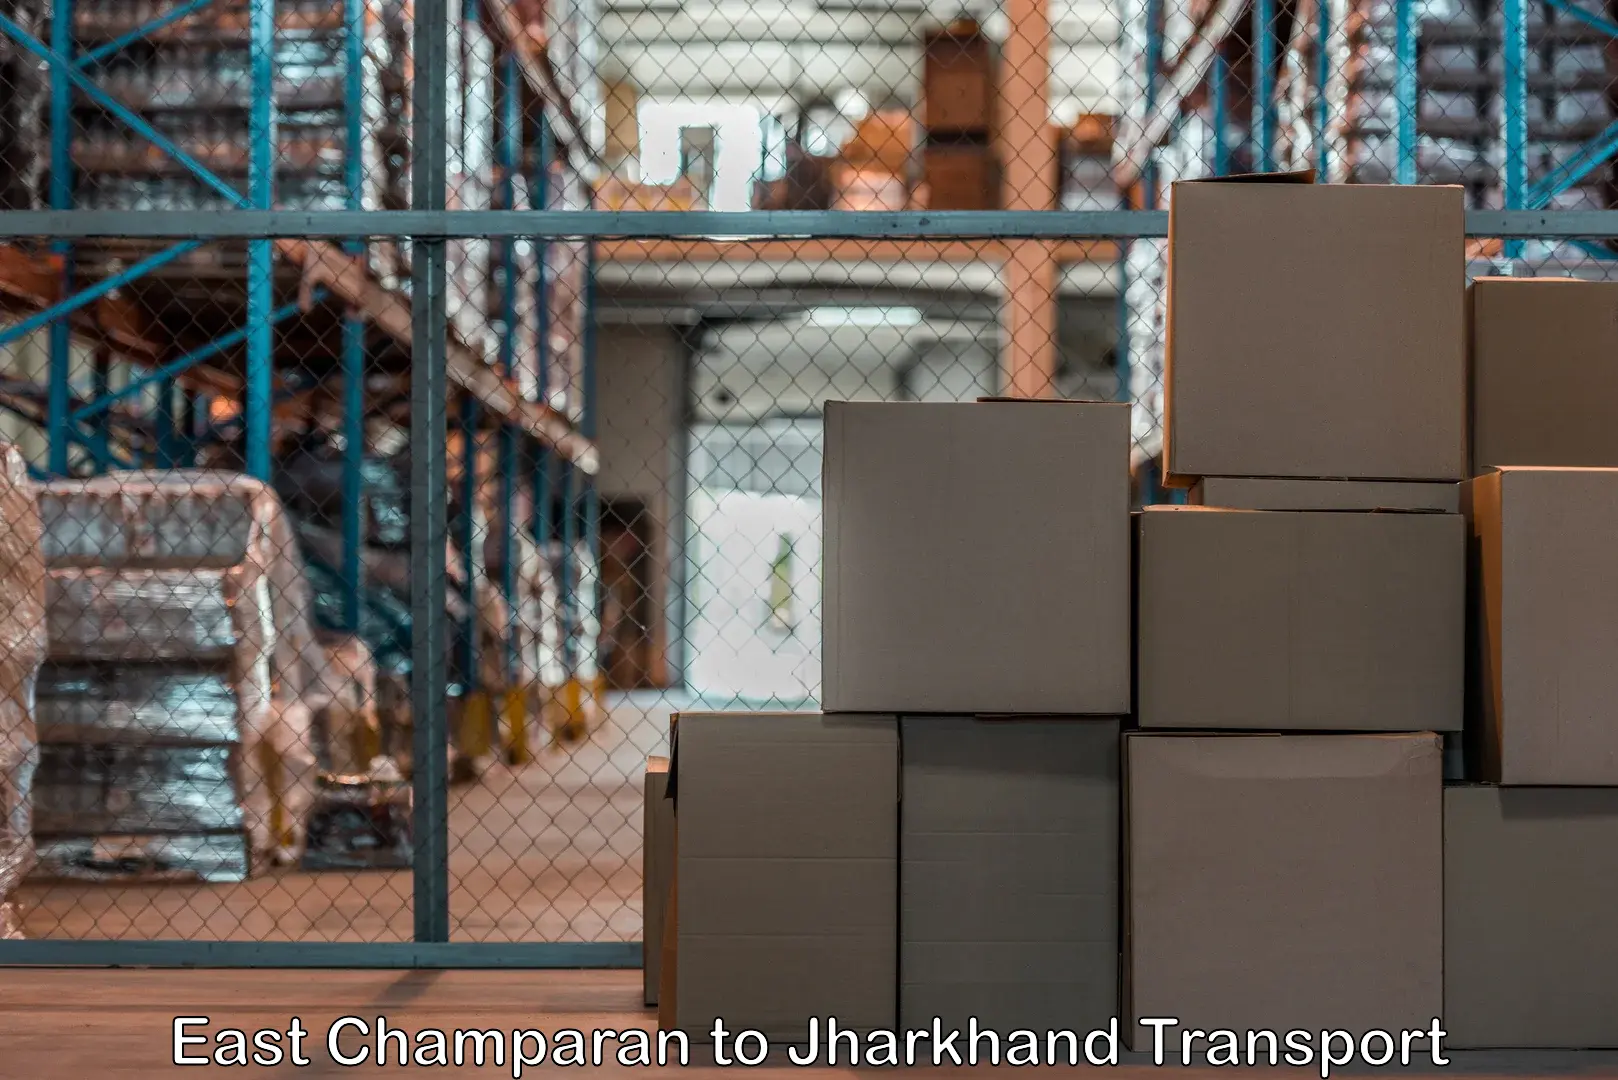 Container transport service East Champaran to Jharkhand